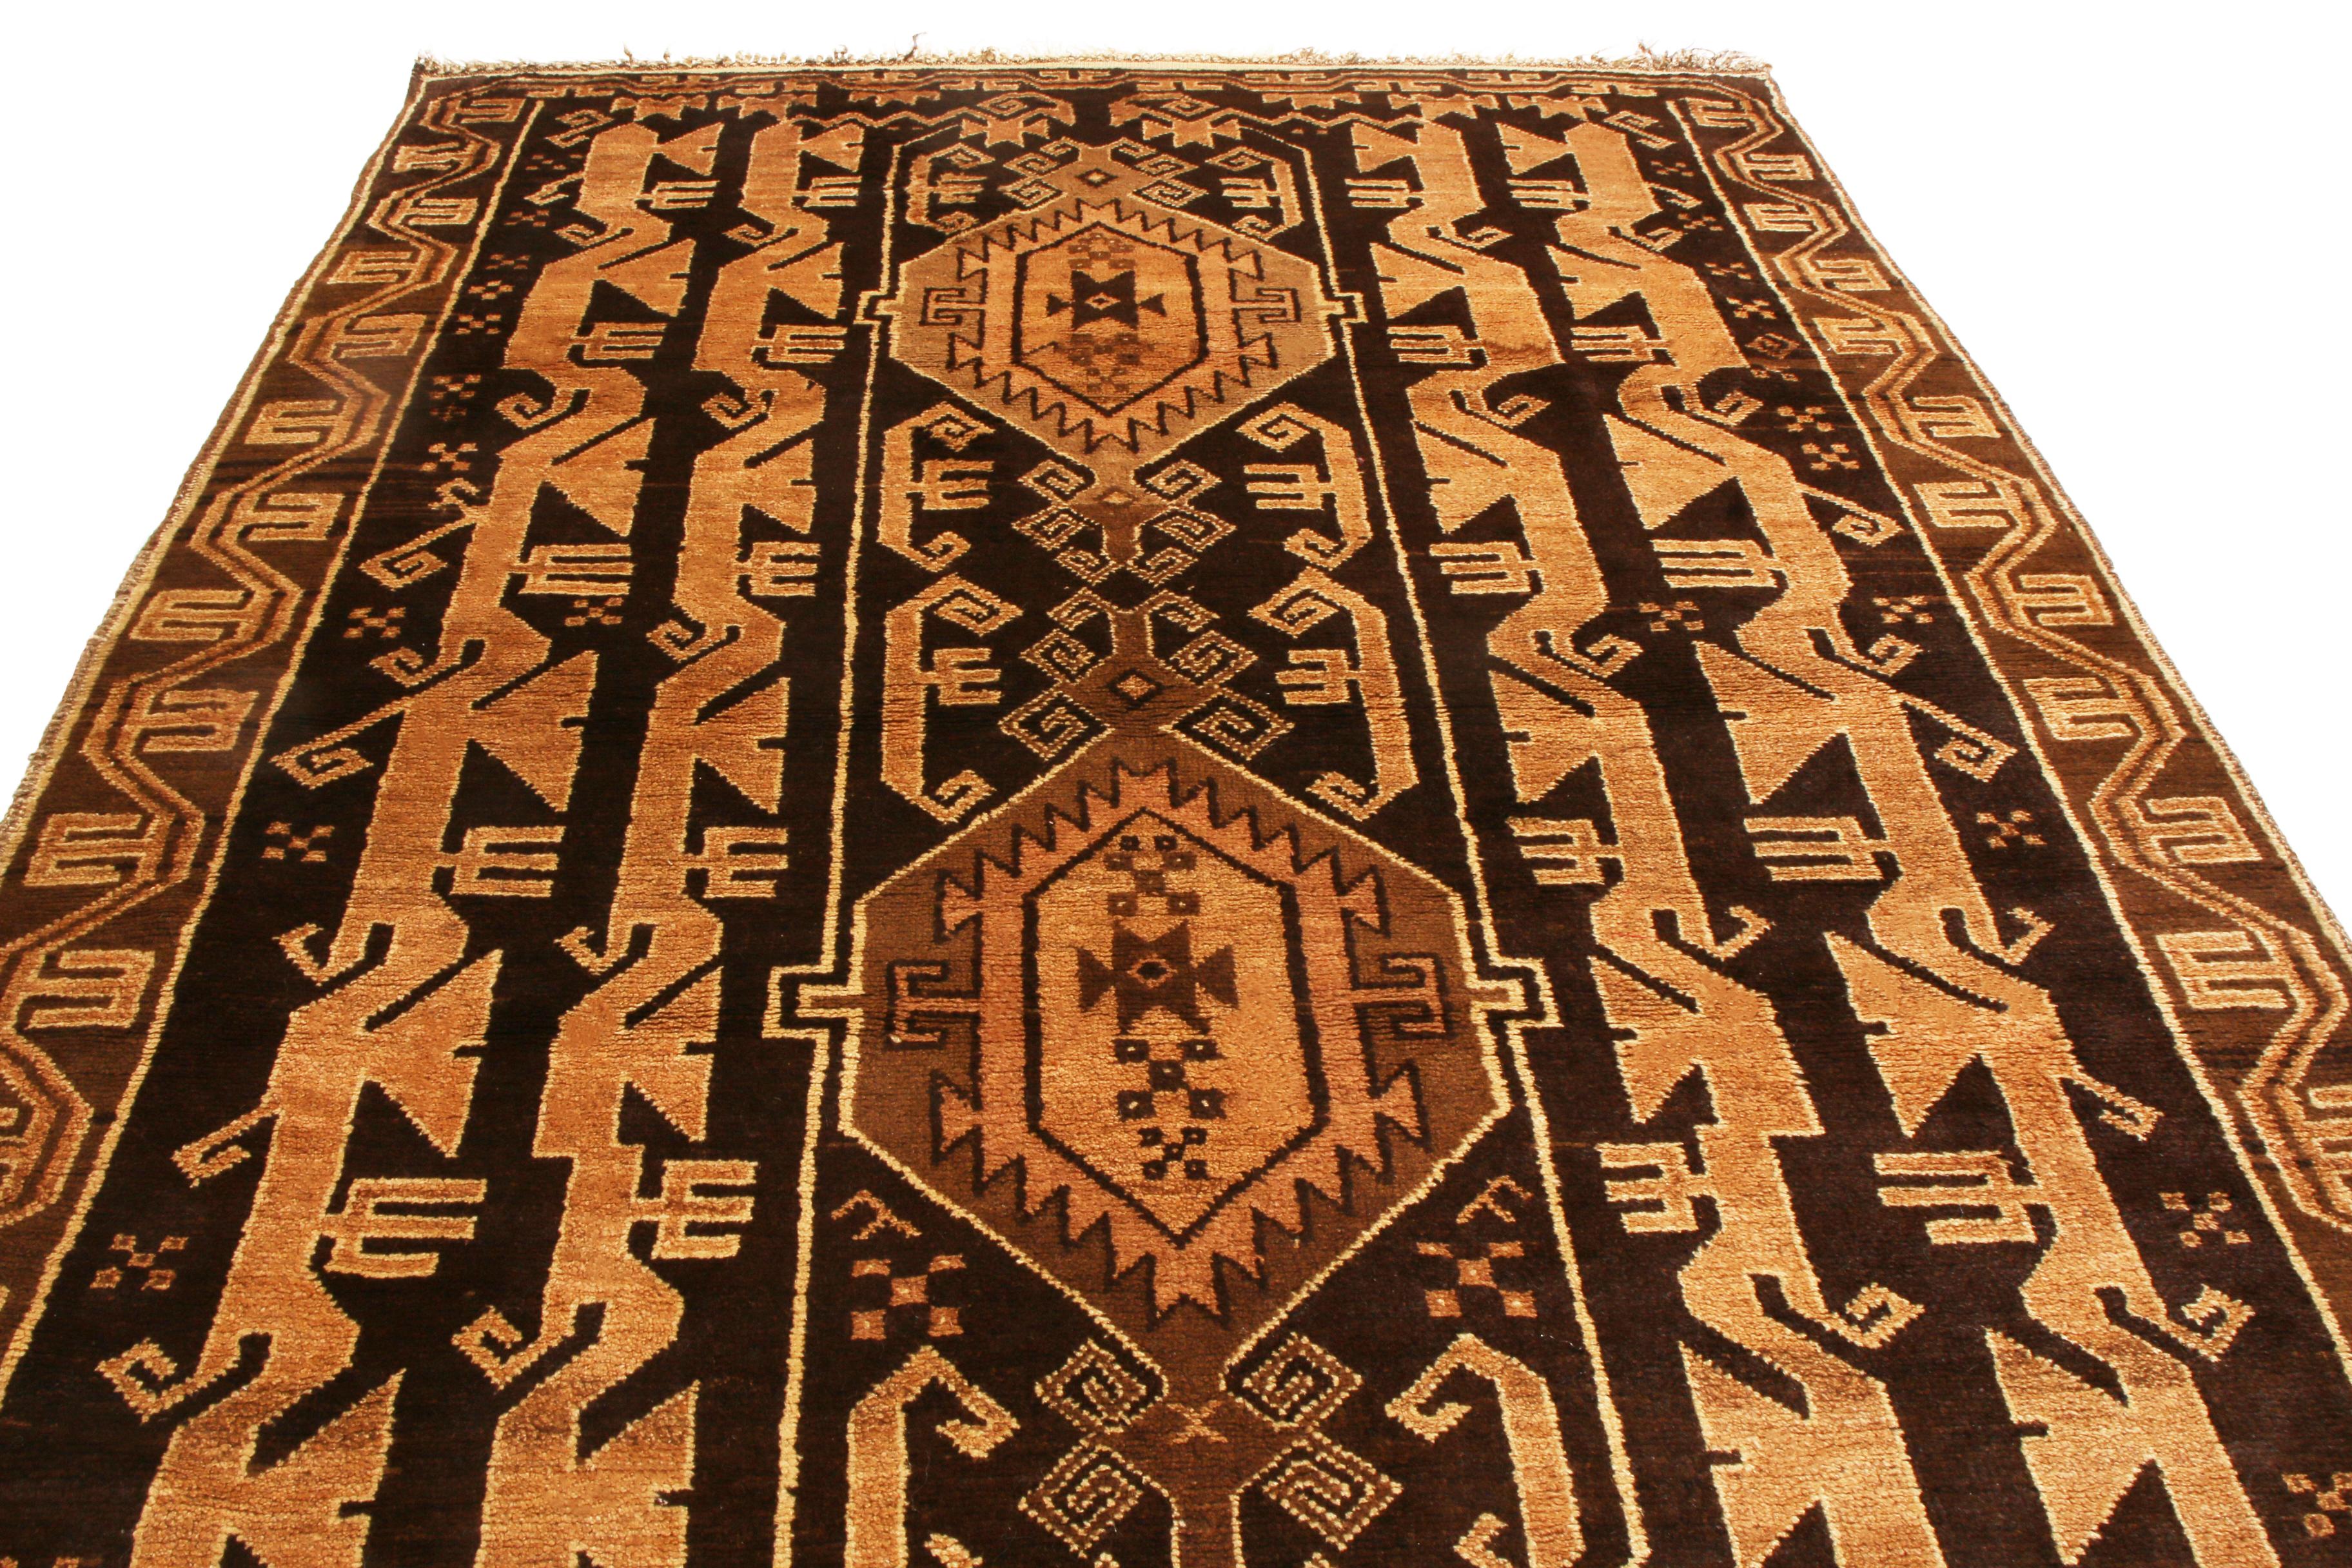 Originating from Persia in 1960, this vintage transitional Baluck wool Persian rug features a distinctly rich variation of color and uncommon pattern. Hand knotted in high quality, luminous wool, the medallions and dancing columns in the field and